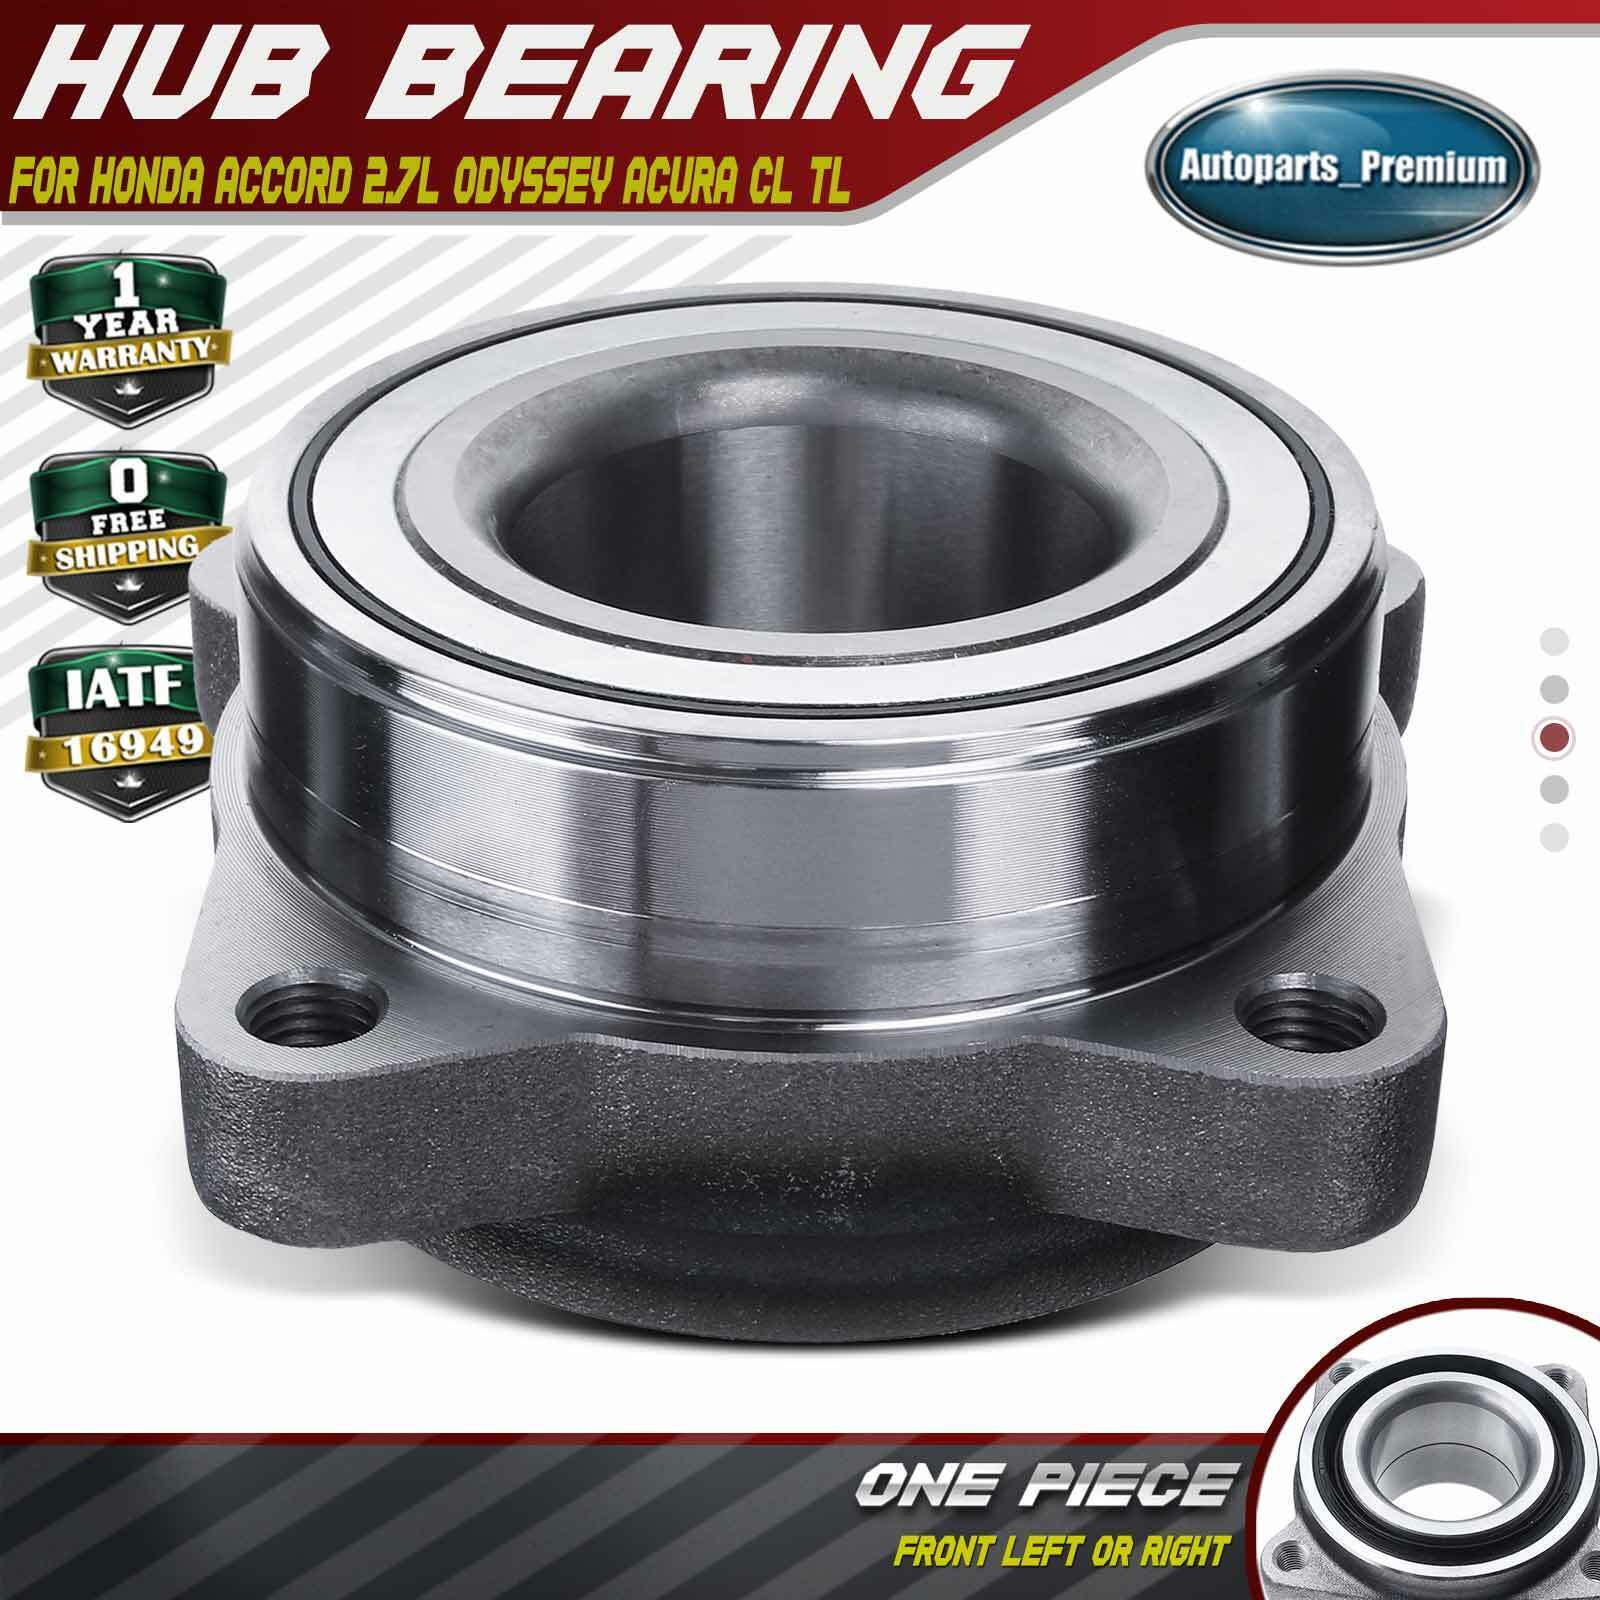 Front L / R Wheel Bearing Hub Assembly for Honda Accord 2.7L Odyssey Acura CL TL